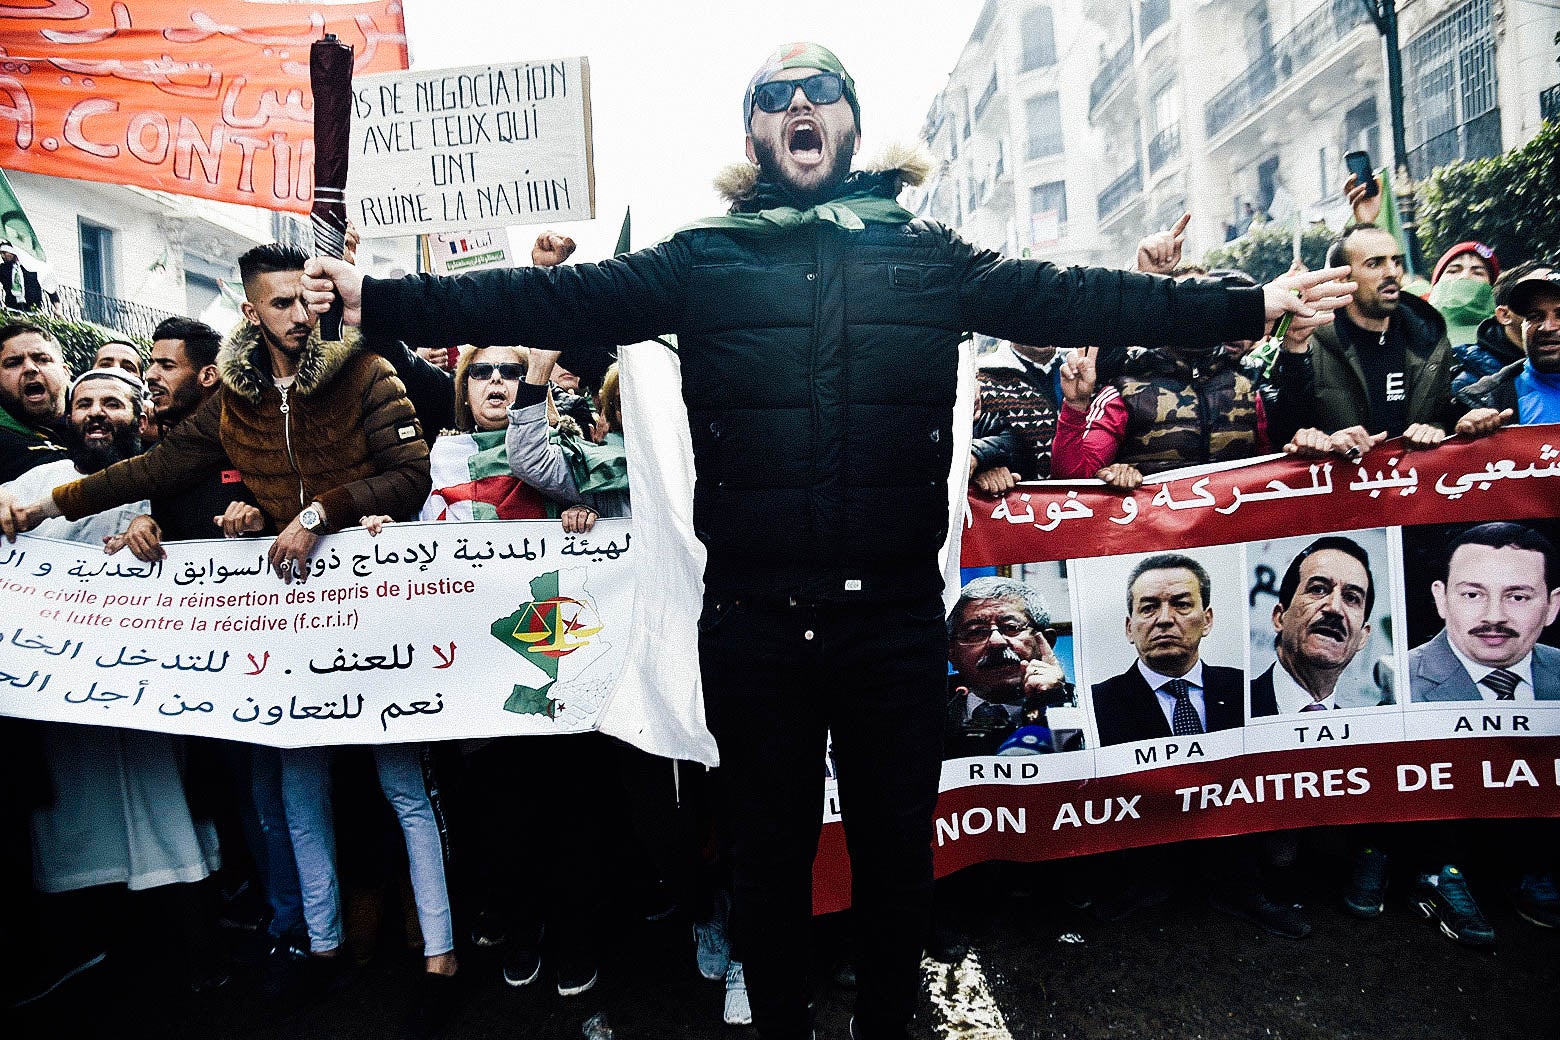 A protester jumps ahead of a marching crowd during a demonstration against ailing President Abdelaziz Bouteflika.